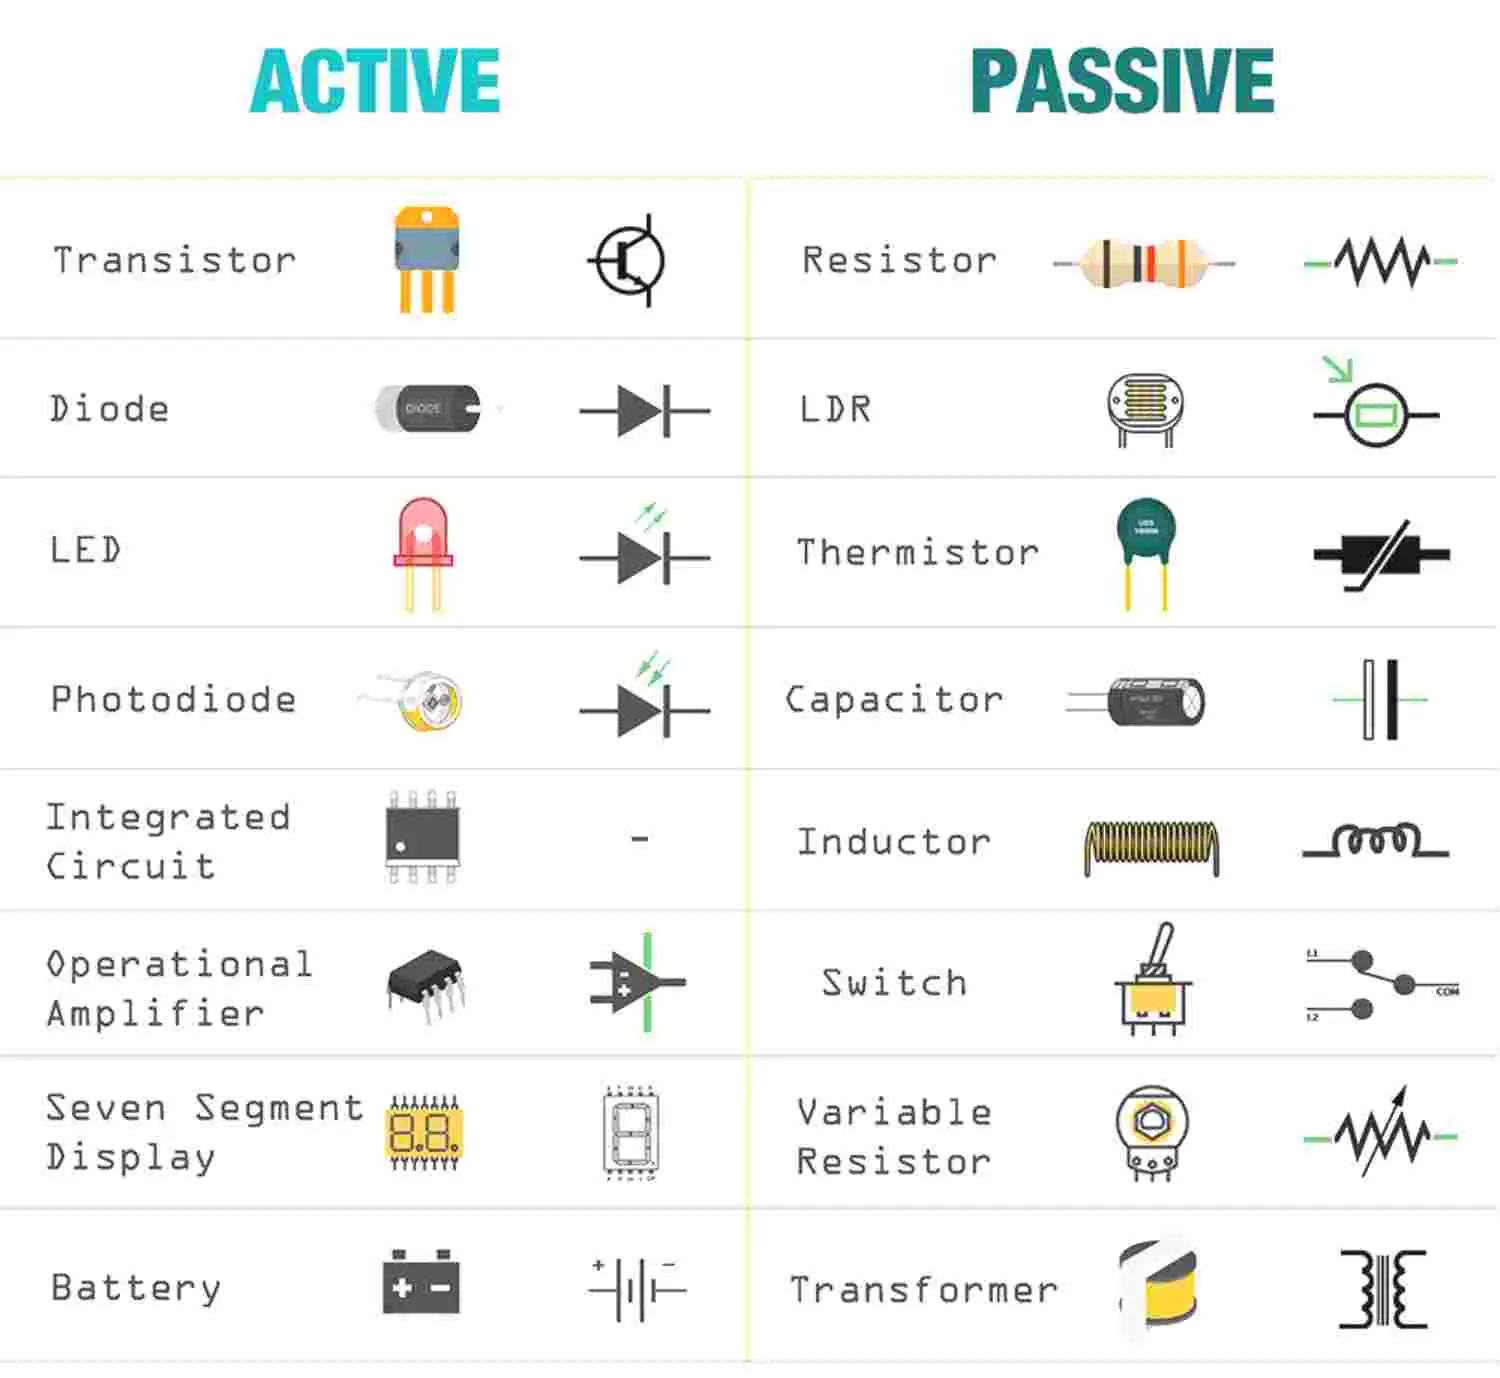 Summary table of the main types of active components and the main types of passive components